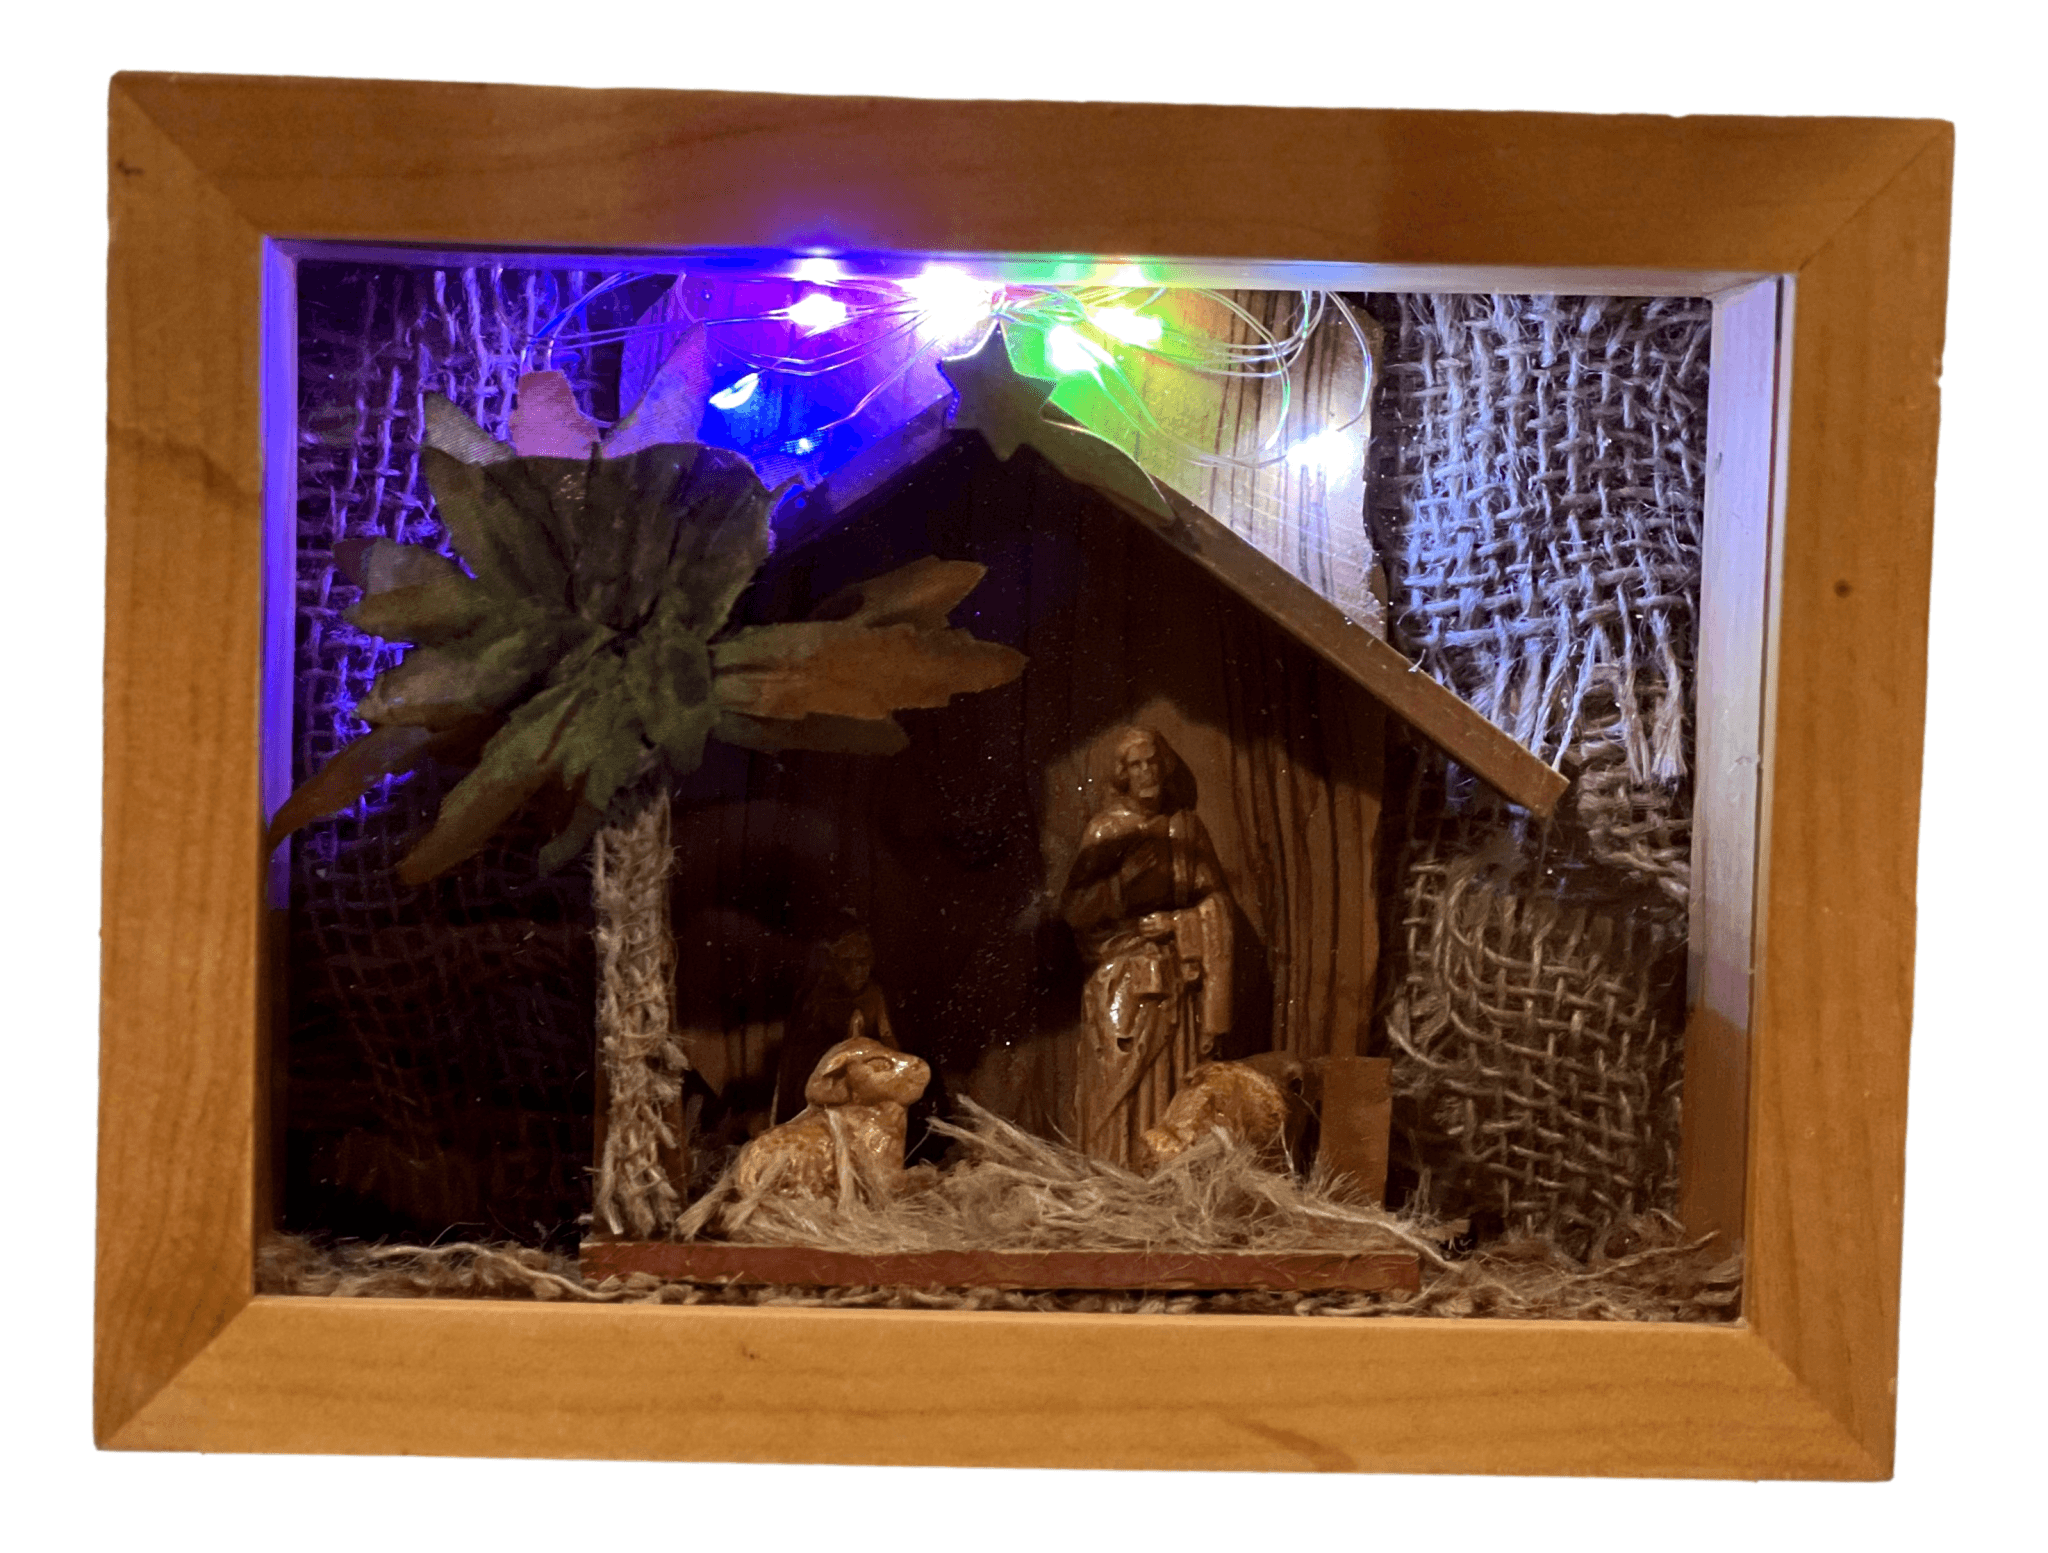 Nativity Light Up Shadow Box Wood Glass AA Battery Powered Handcrafted By Local El Paso Artist Norma H: 6 inches W: 3 inches L: 8 inches - Ysleta Mission Gift Shop- VOTED 2022 El Paso's Best Gift Shop